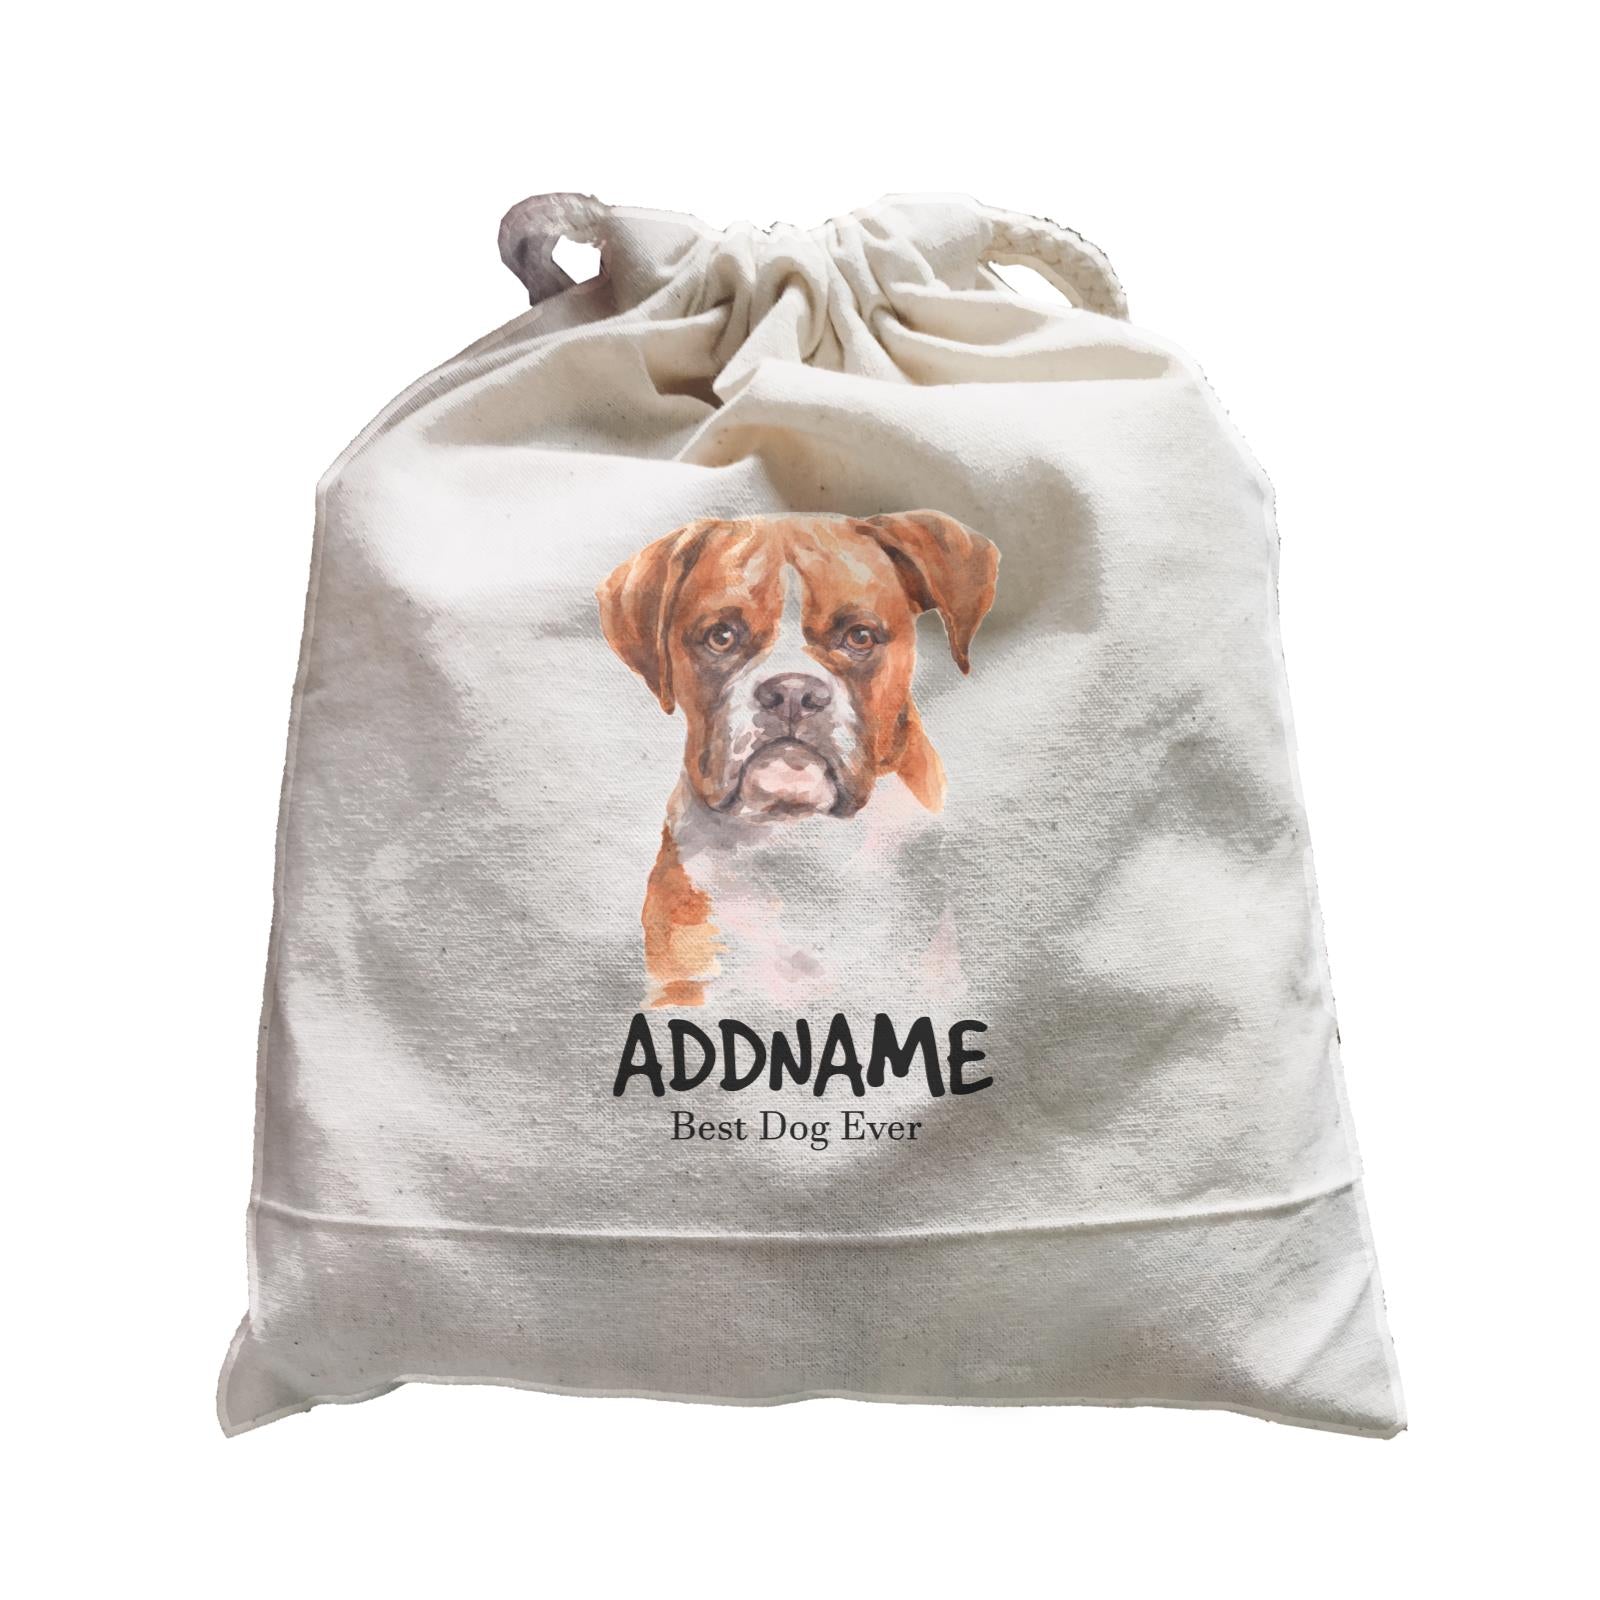 Watercolor Dog Boxer Brown Ears Best Dog Ever Addname Satchel